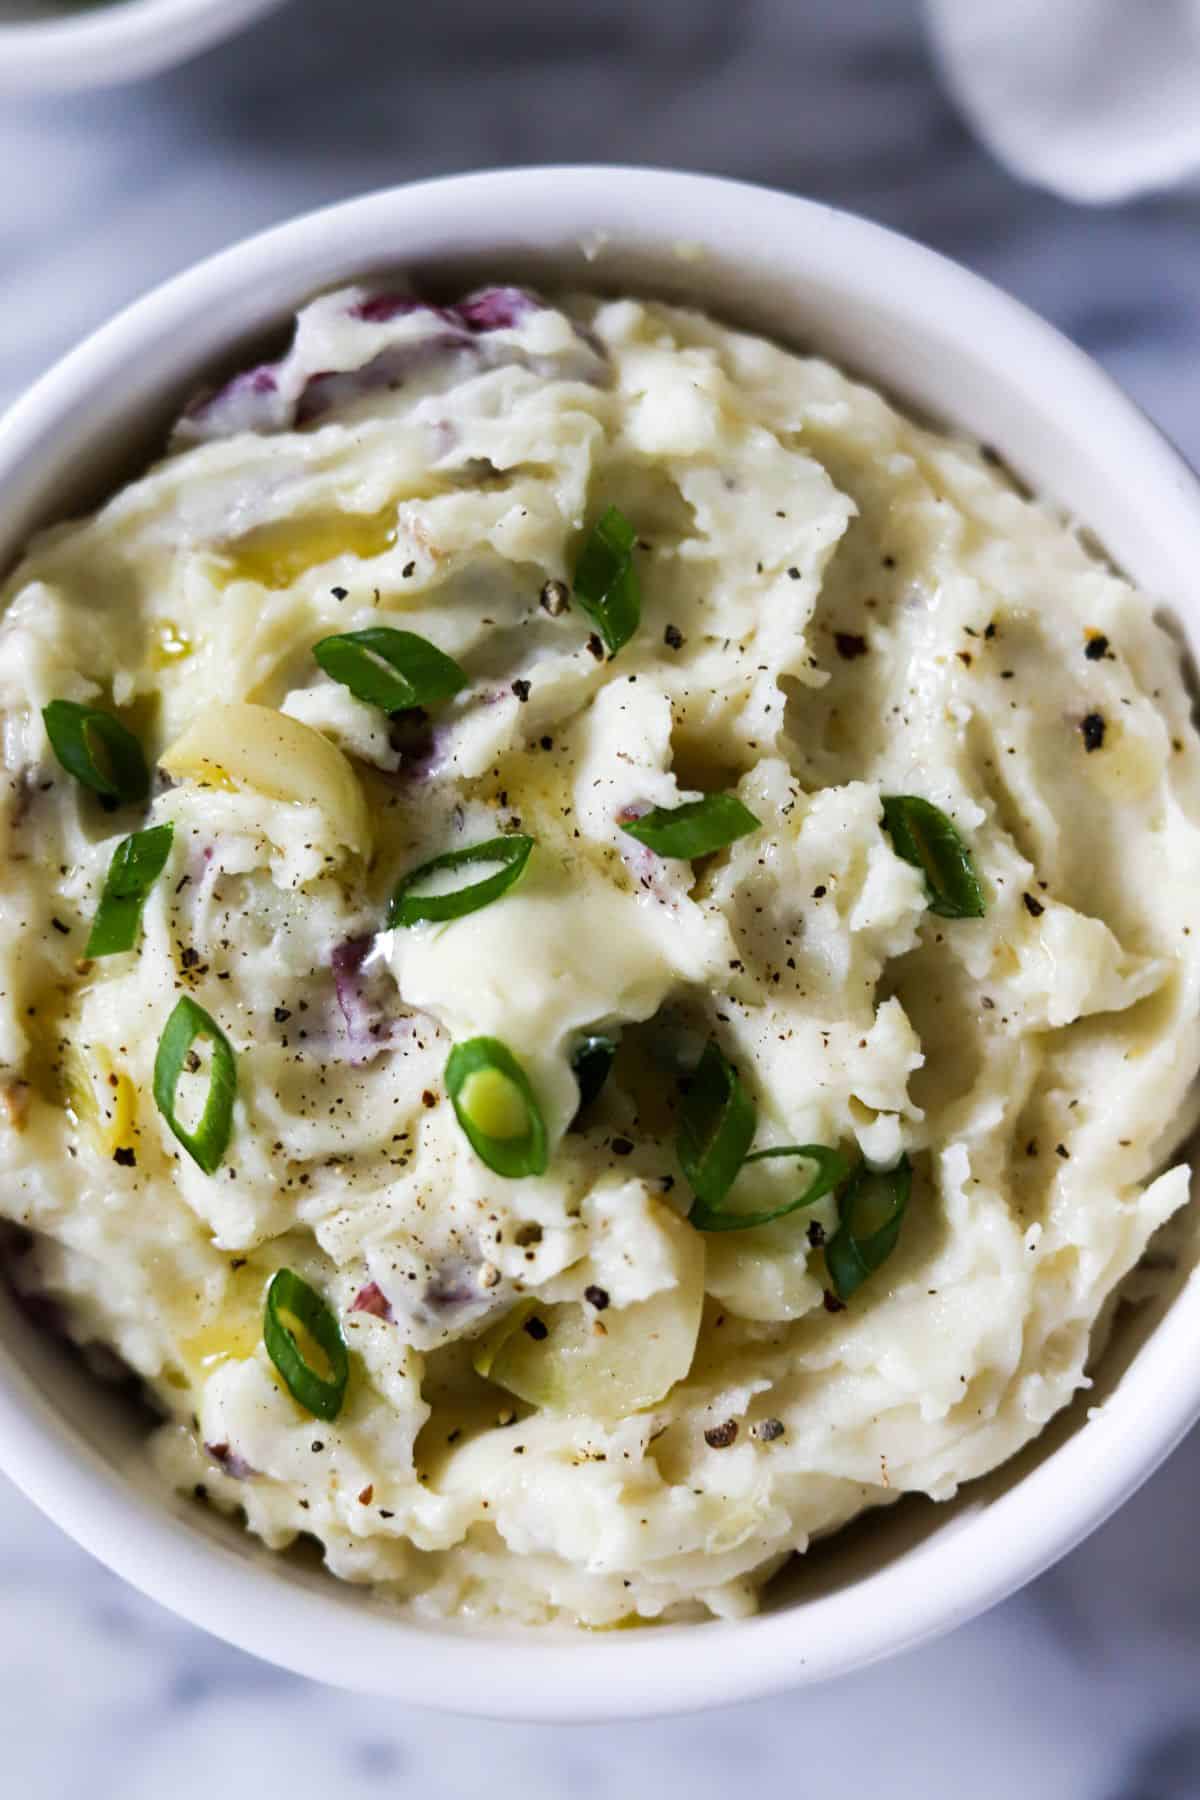 bowl of mashed potatoes with red skin topped with butter, black pepper and sliced green onions.